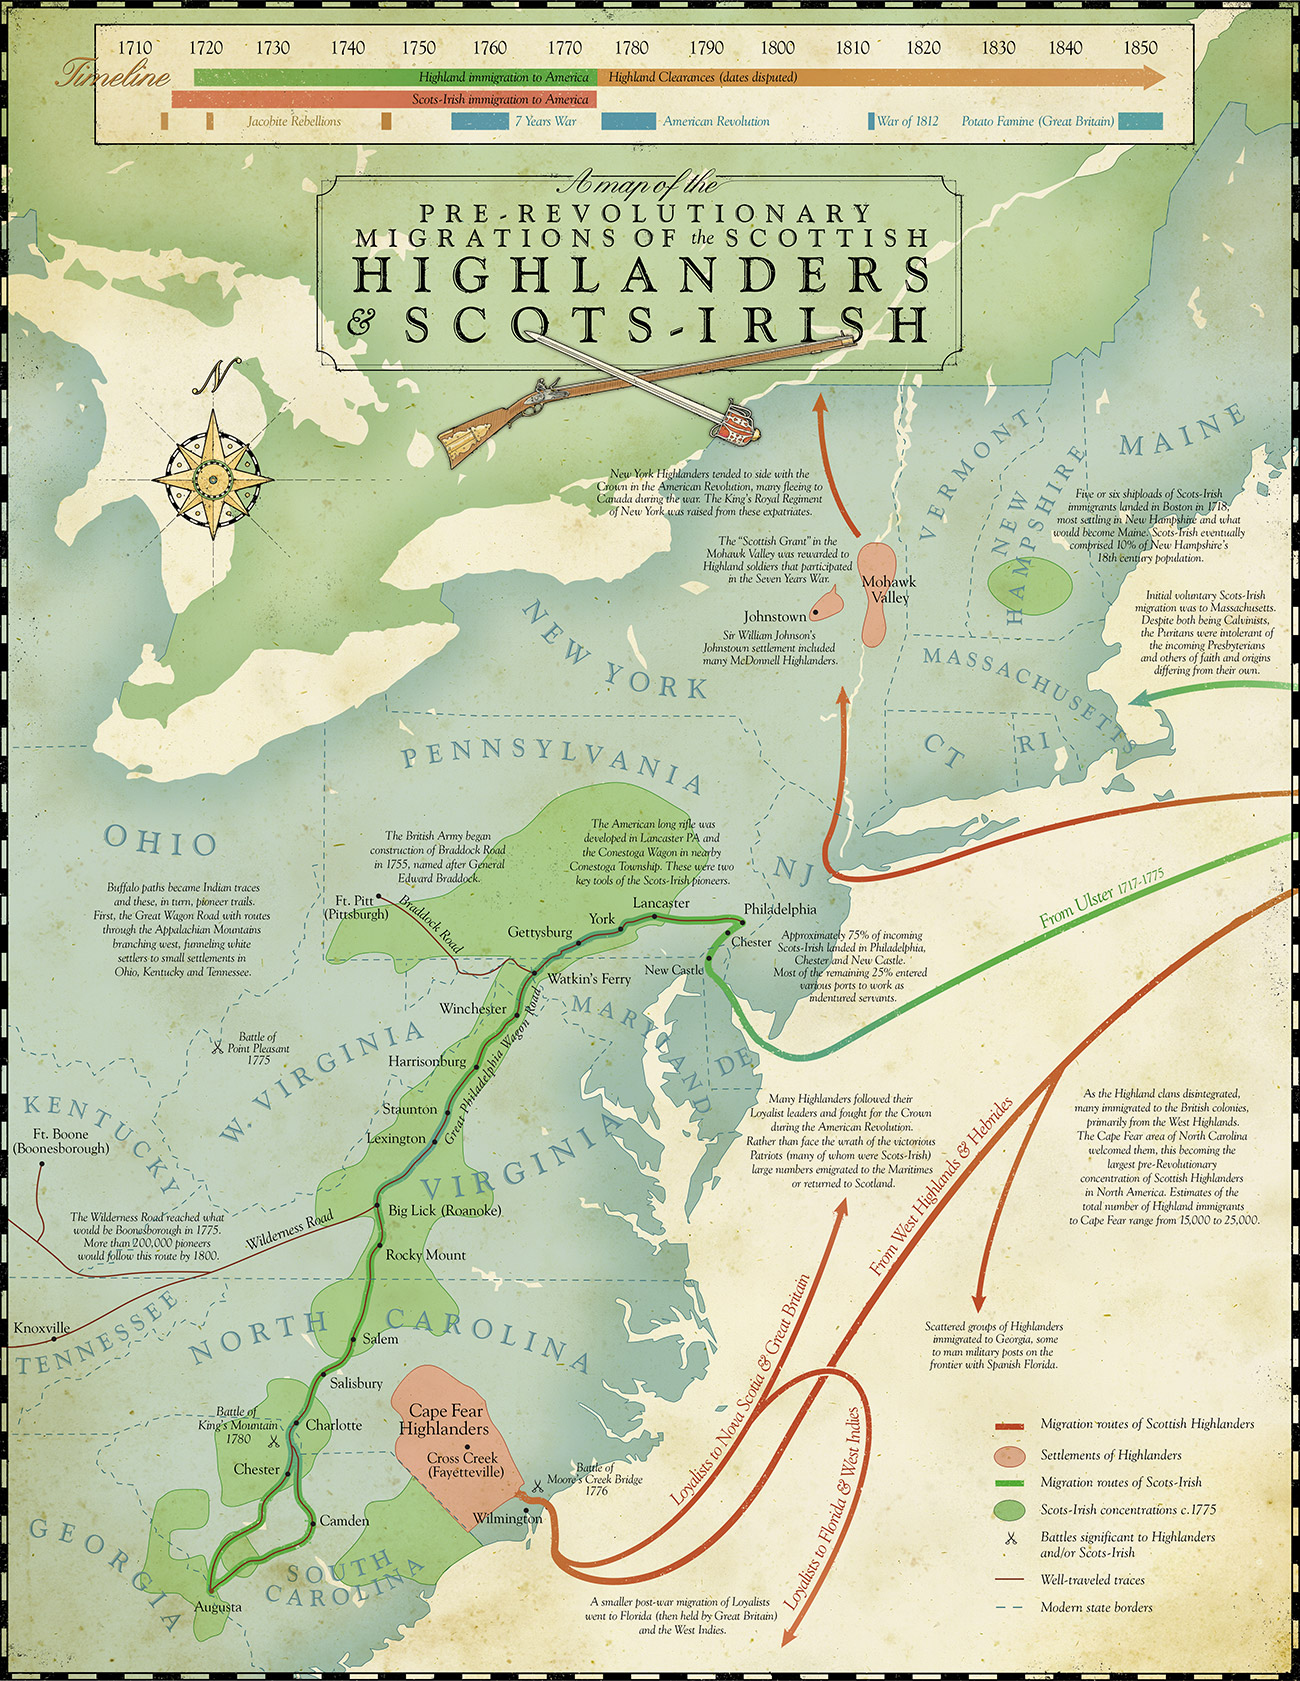 Pre-Revolutionary immigration of Scots-Irish and Scottish Highlanders to the American Colonies